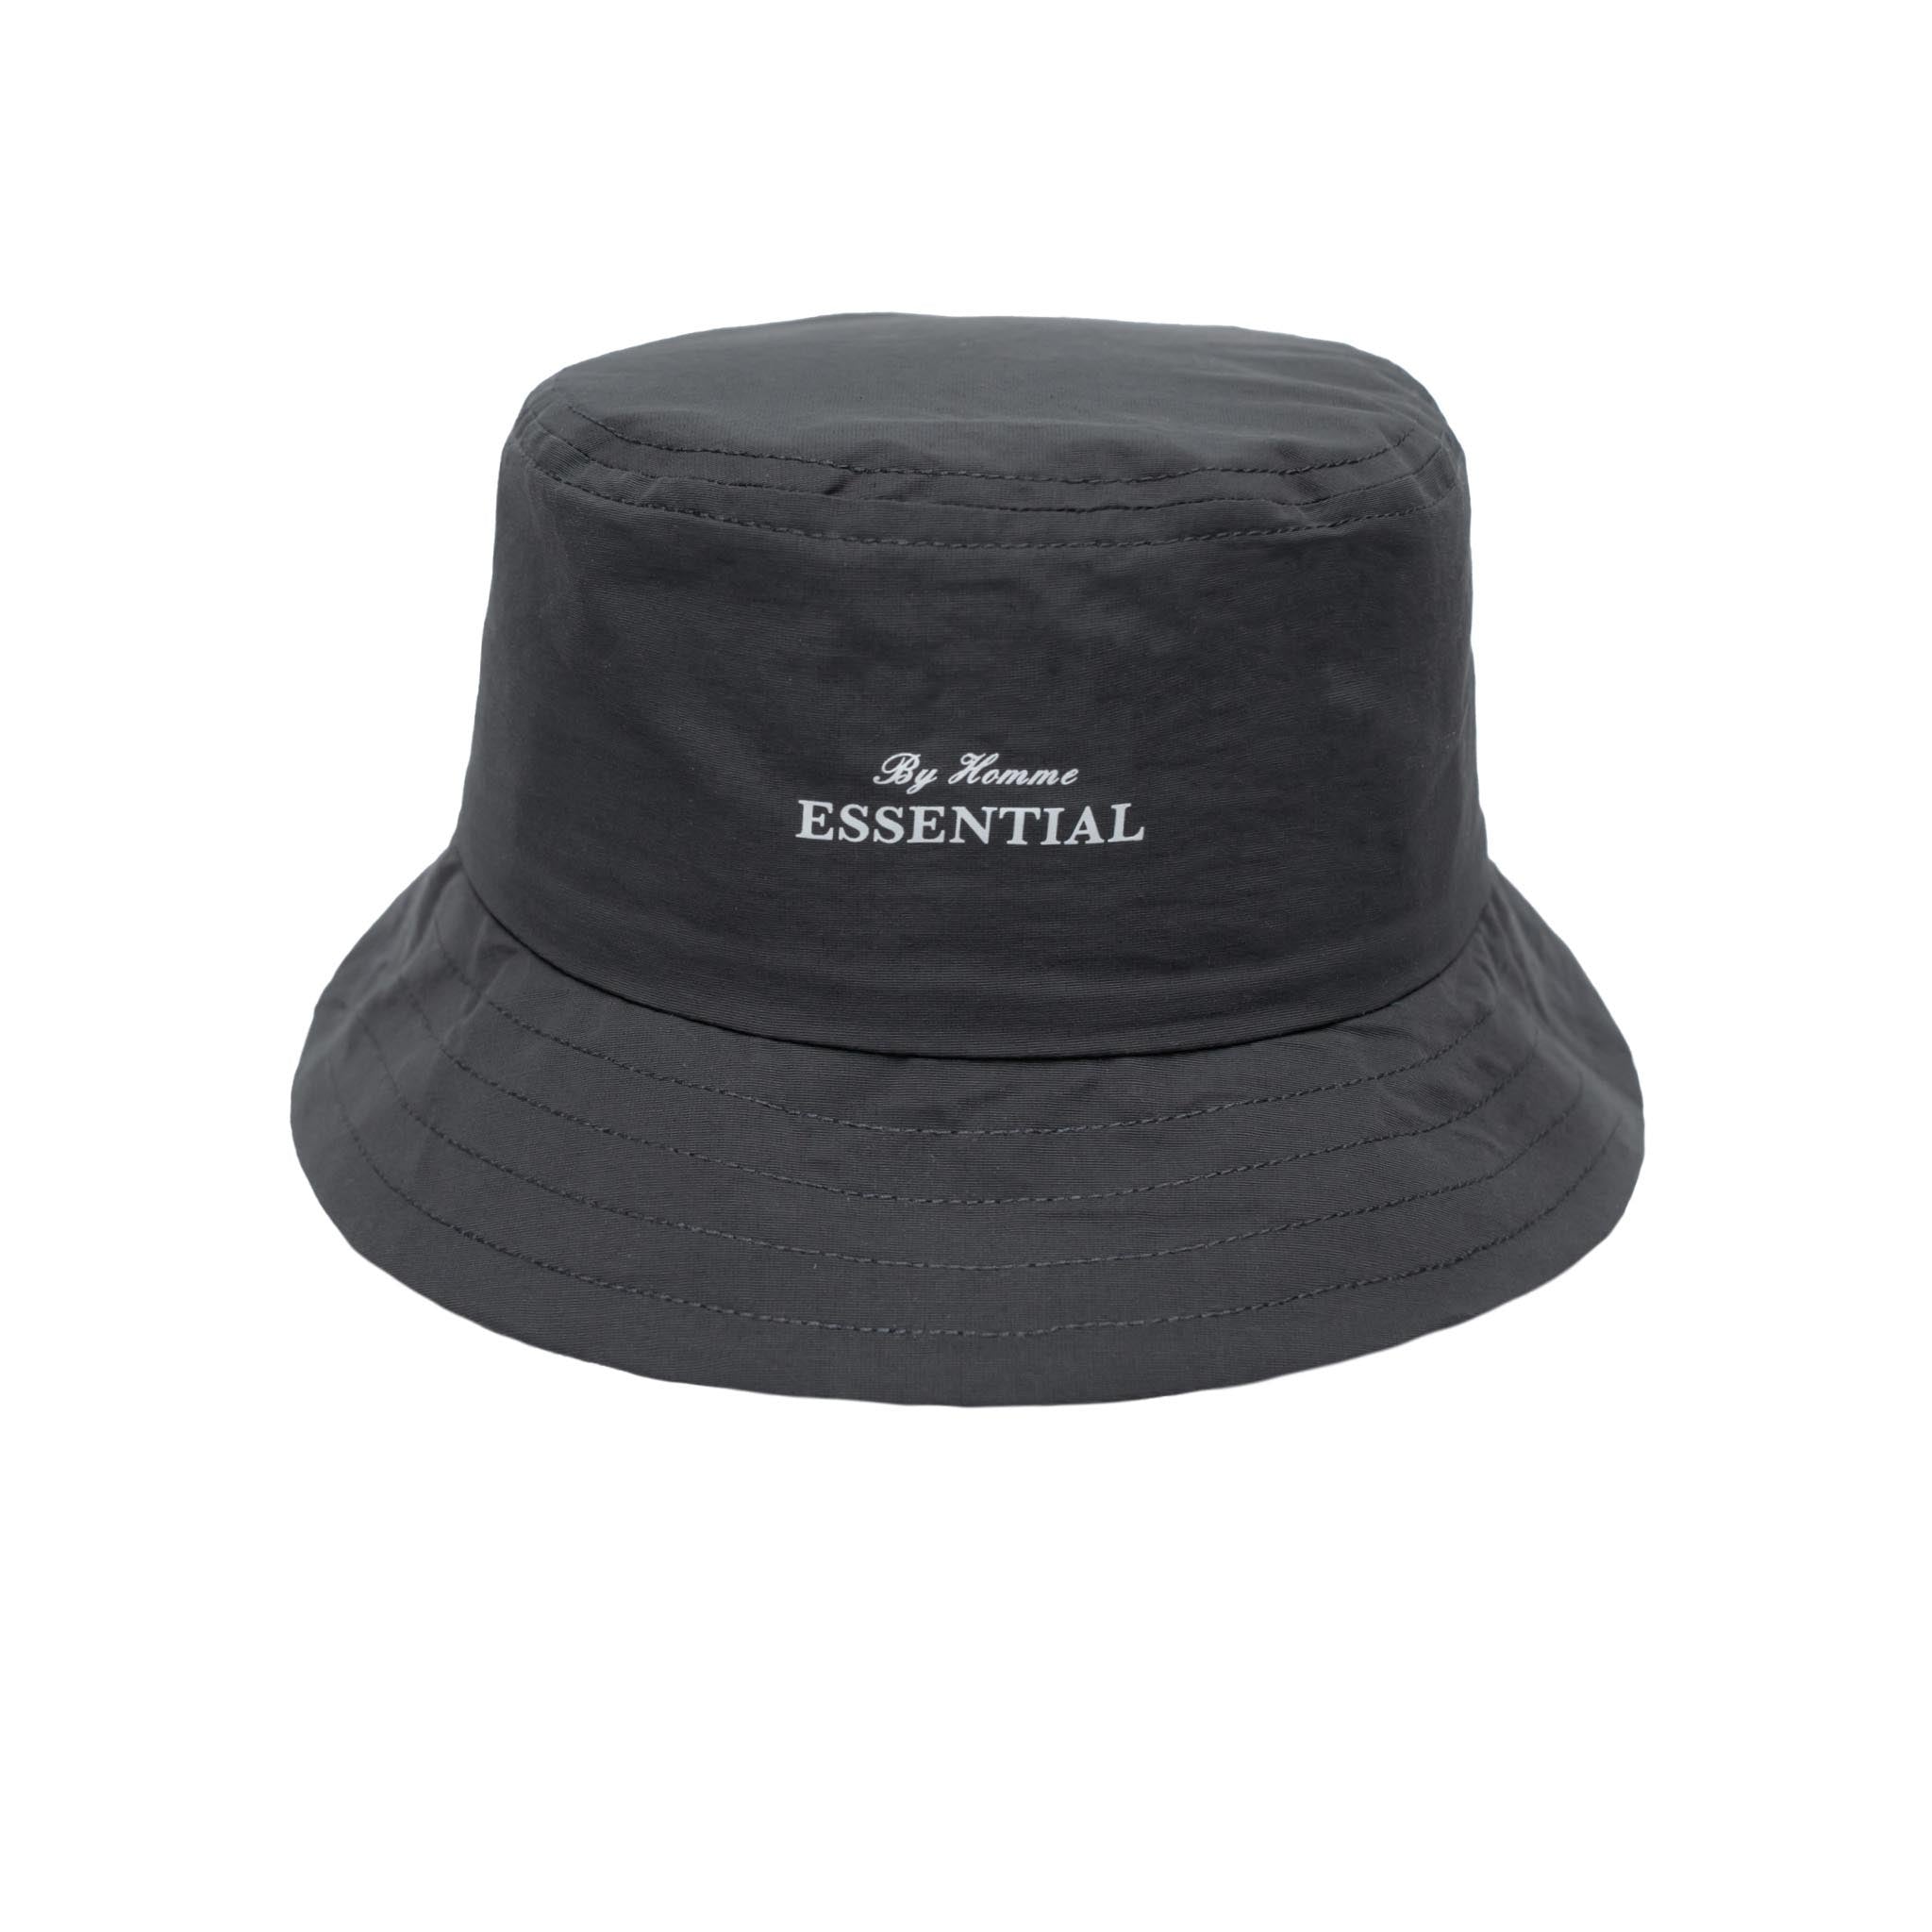 HOMME+ ESSENTIAL by Homme Bucket Hat Charcoal